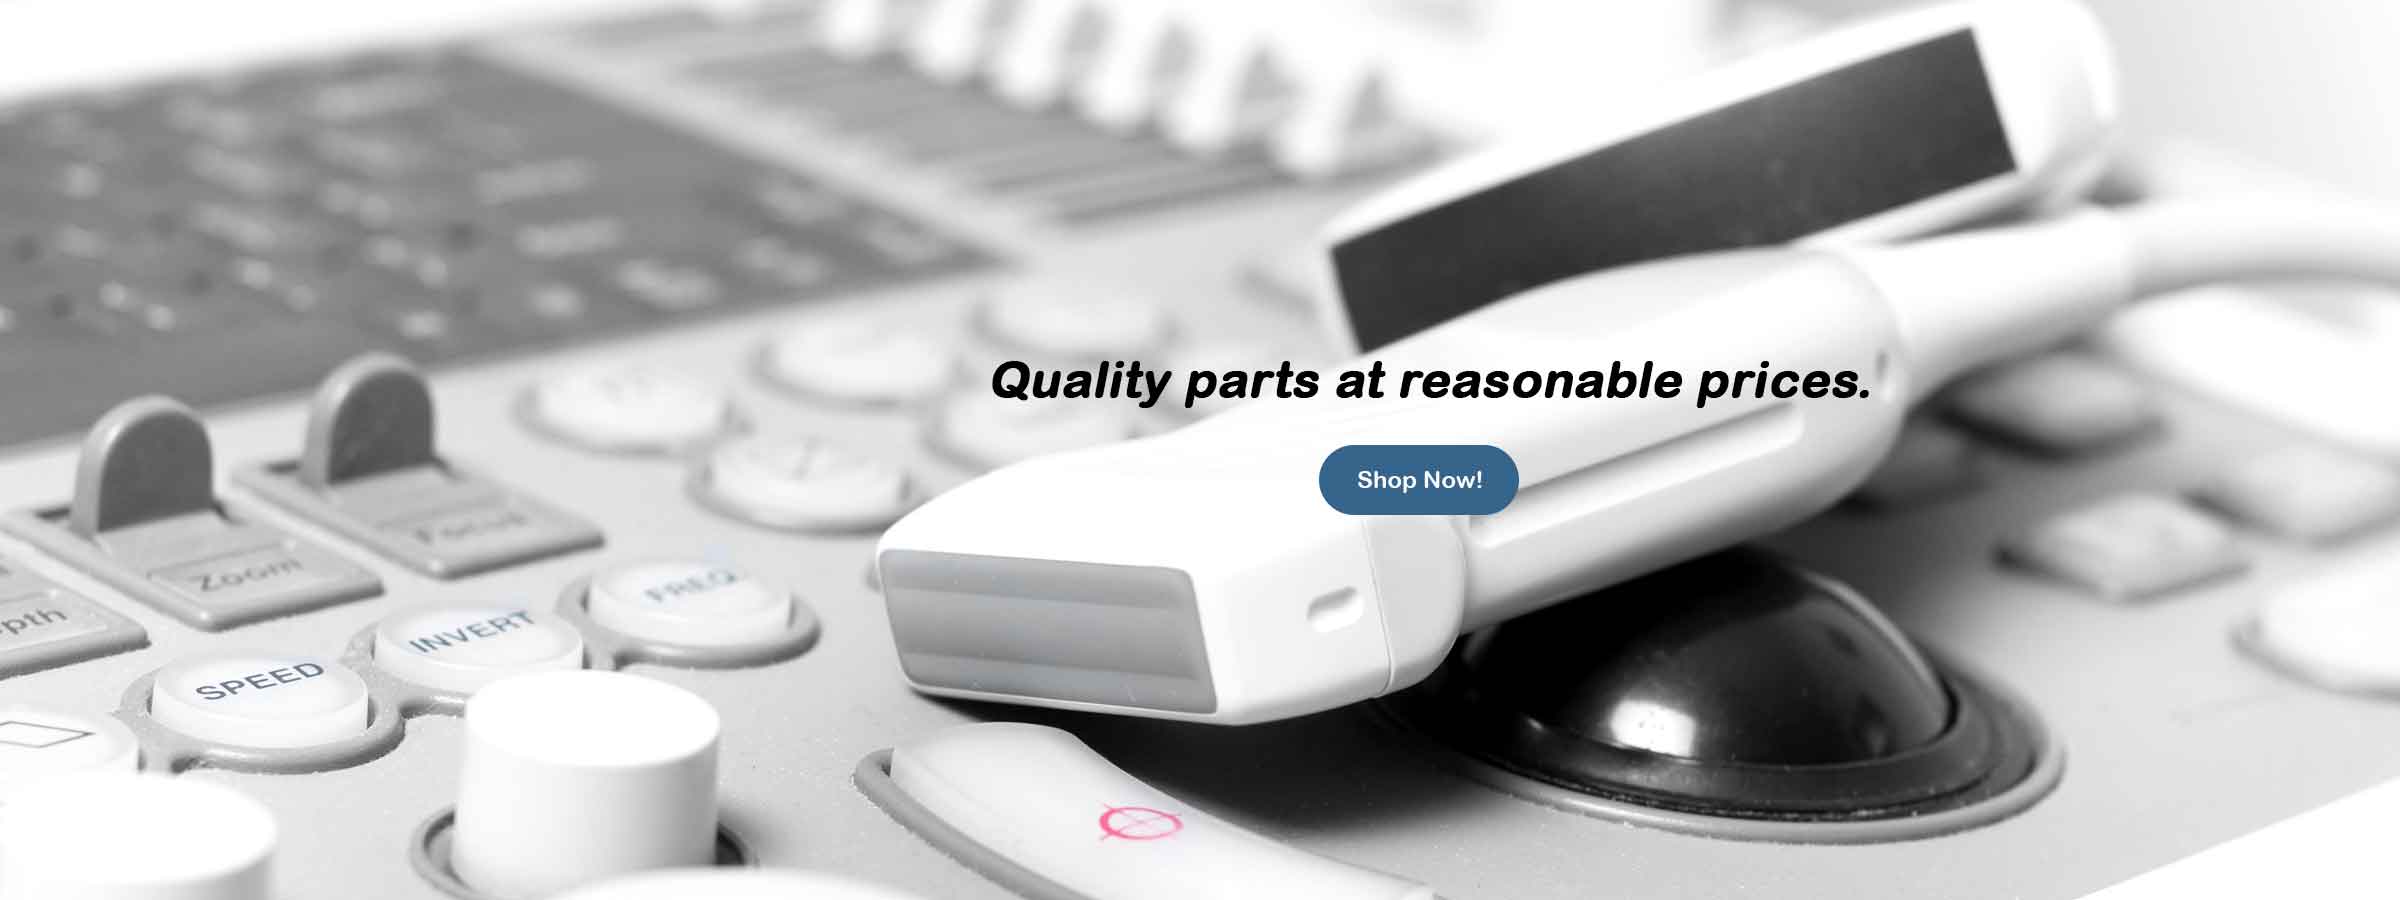 Quality parts at reasonable prices